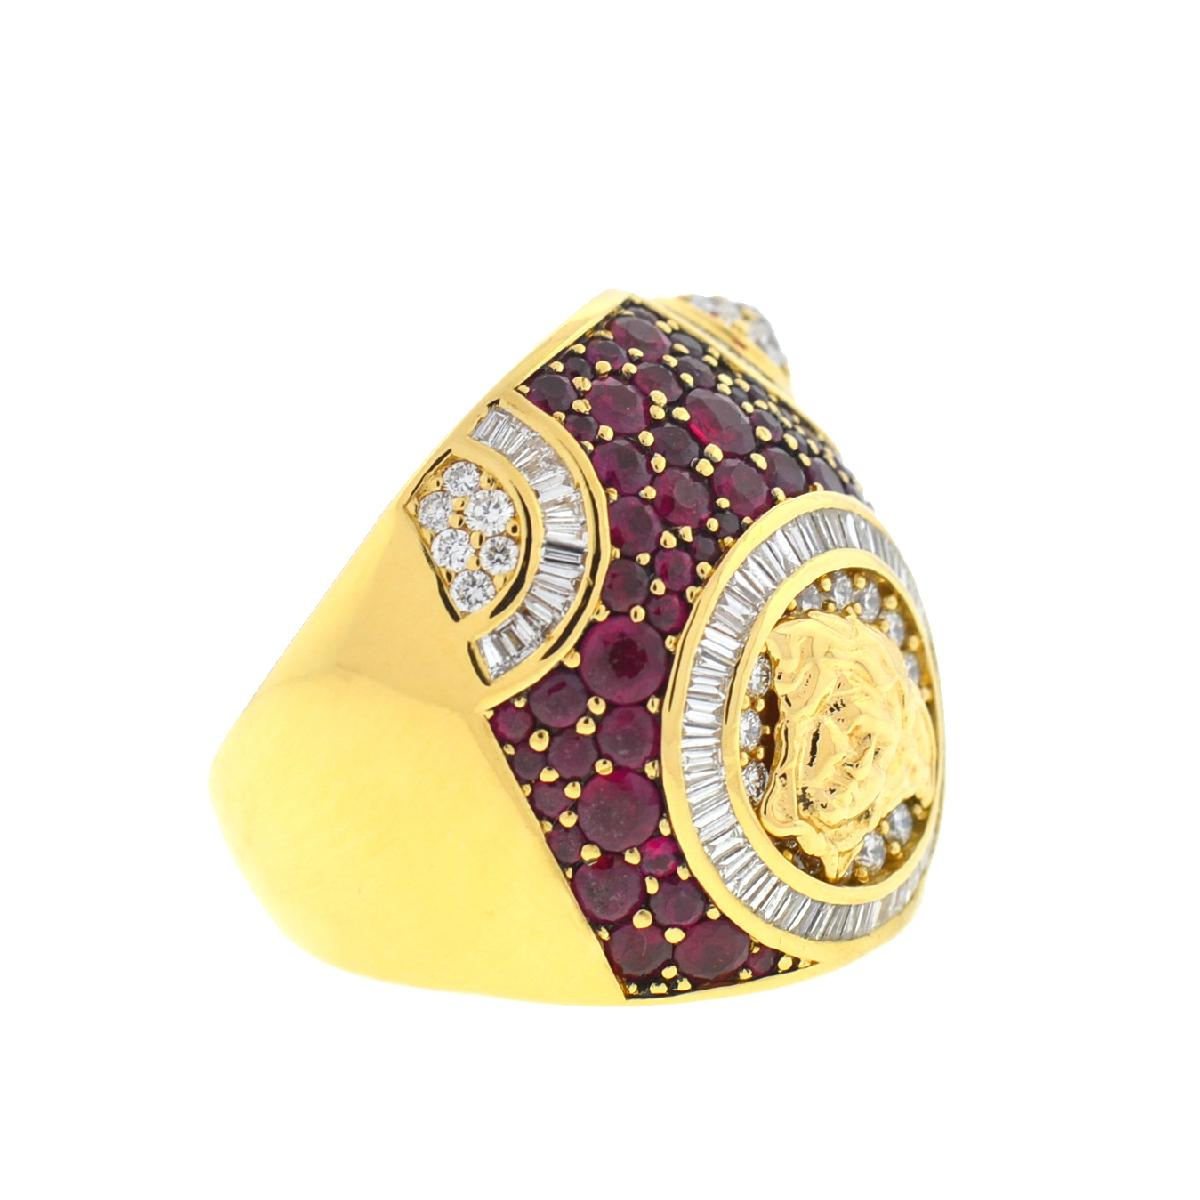 Company-Versace
Style-Medusa Ruby Diamond Ring - Muse 2012 Collection 
Metal-18k Yellow Gold
Size-8.75
Weight-24.49 grams
Stones-Diamonds approx 1 Ct tw
Sku-8009-2REE